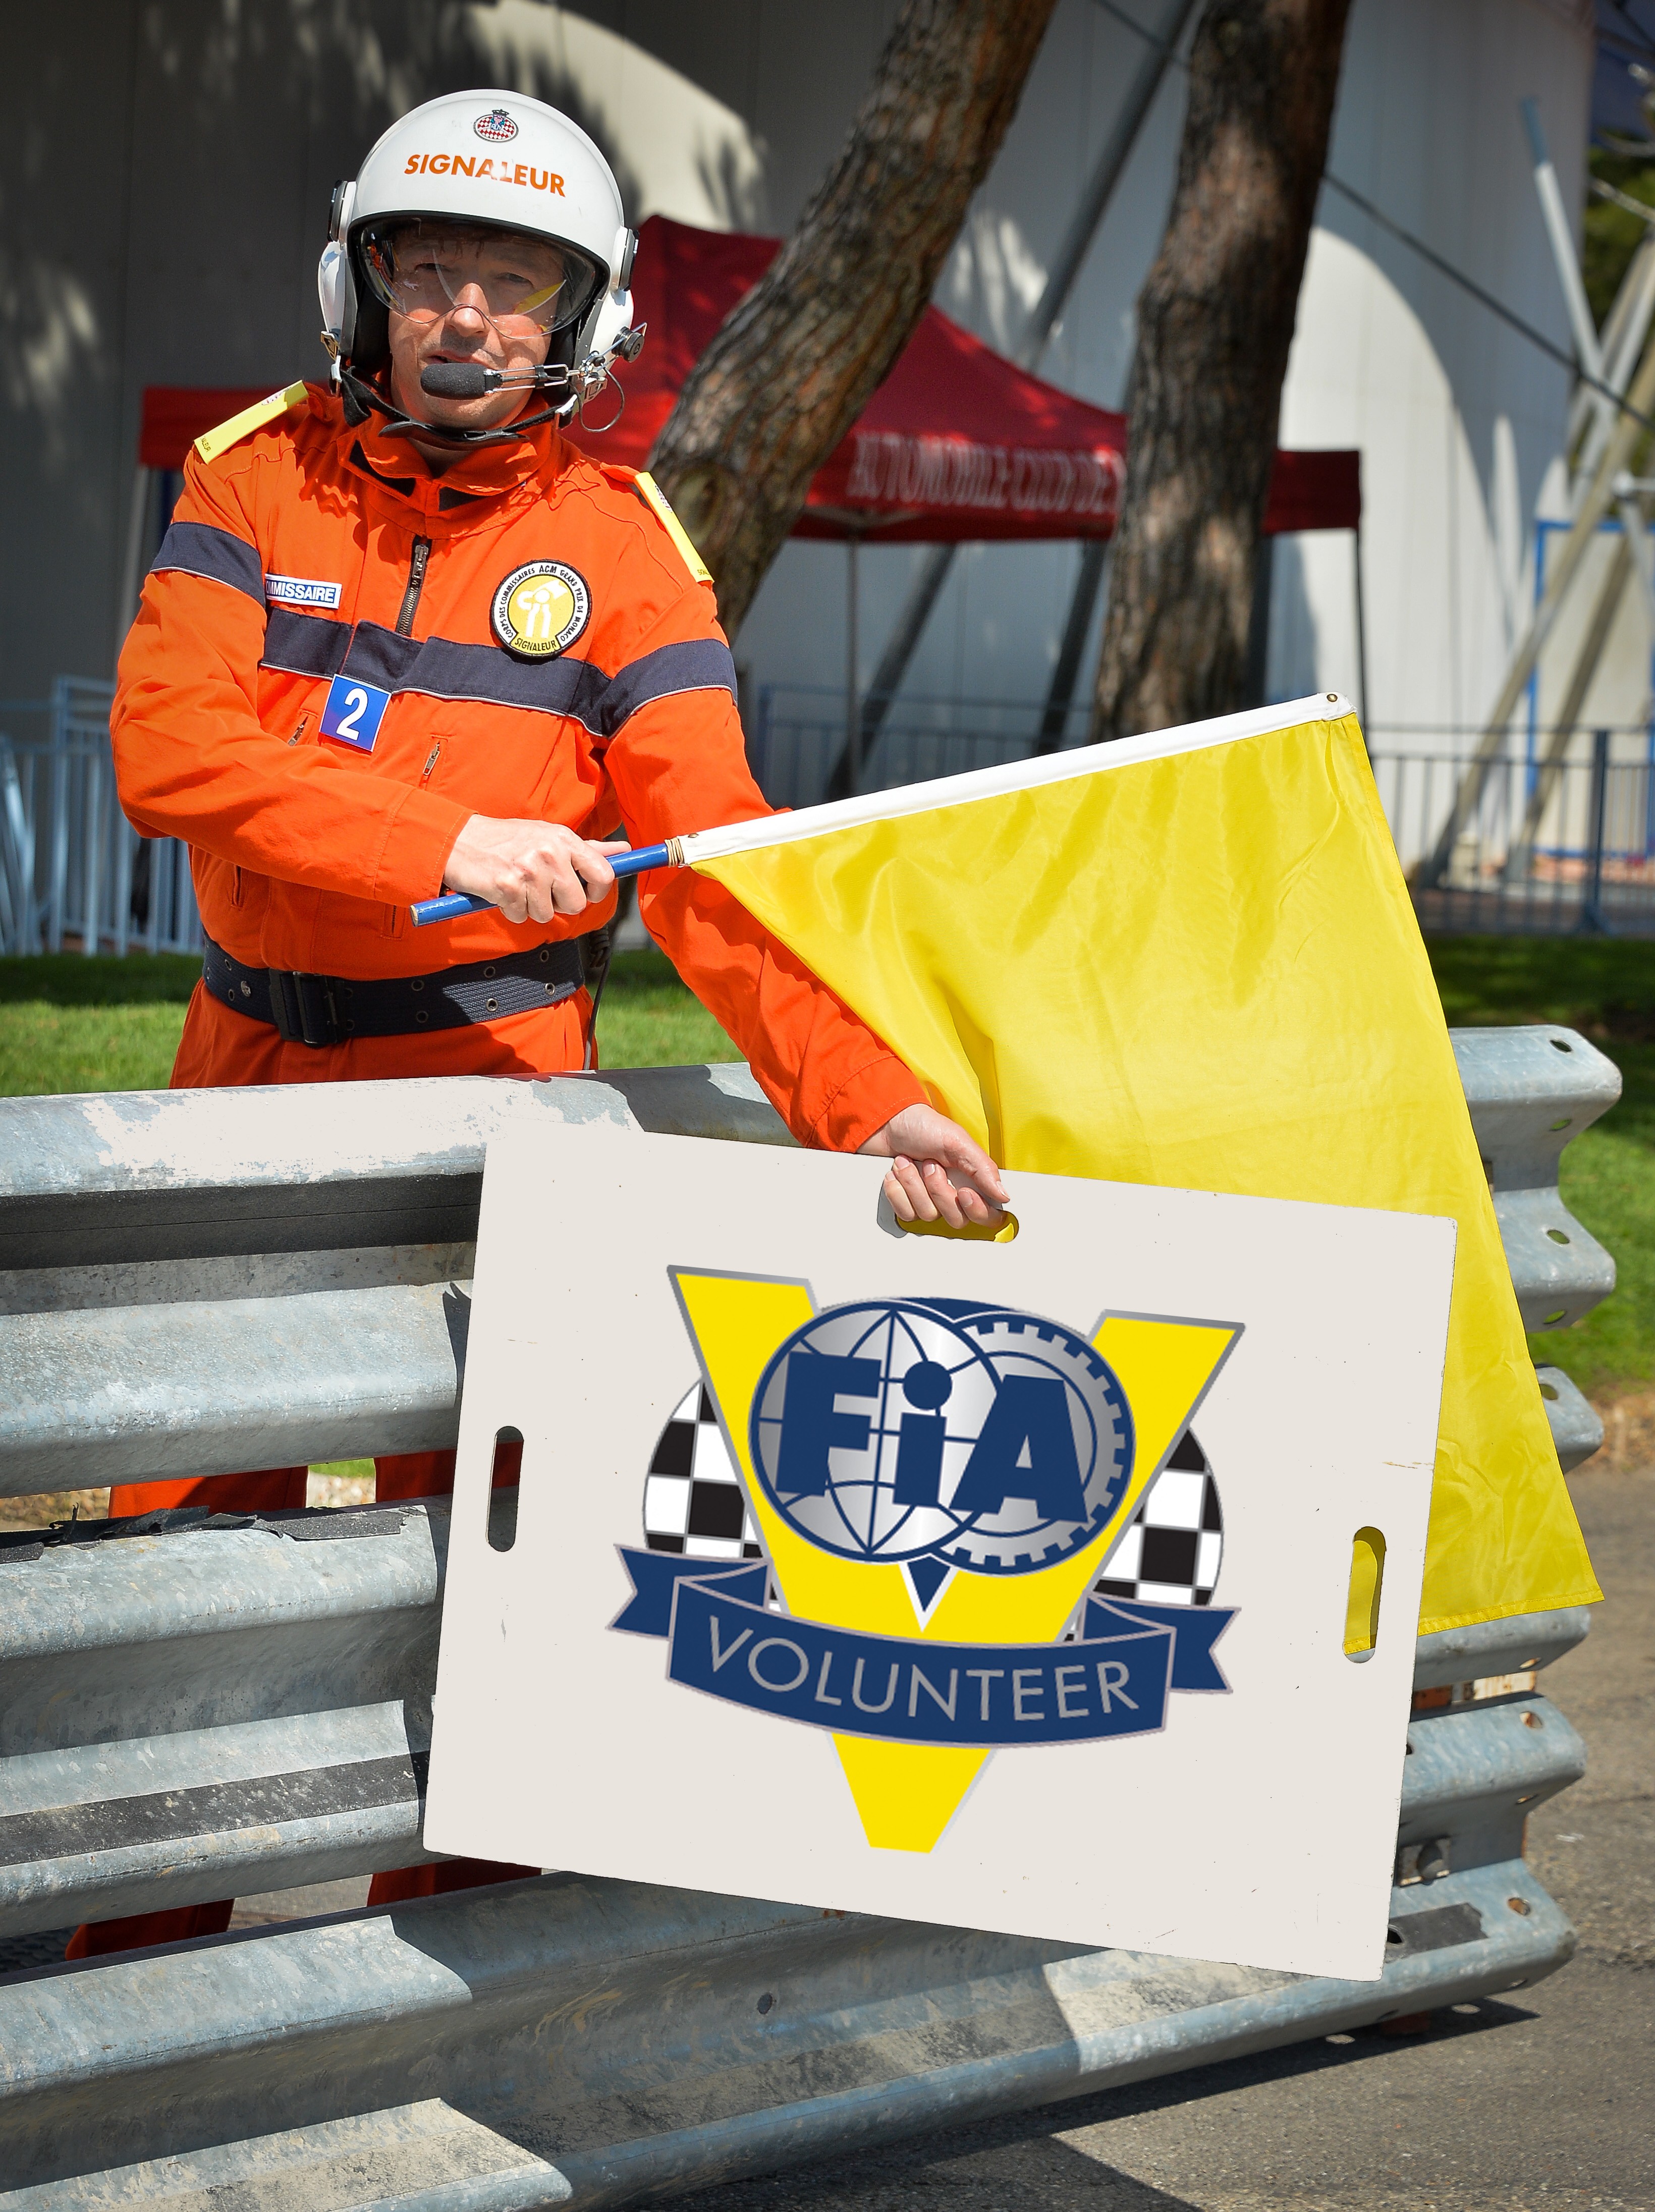 FIA official at circuit event displaying yellow flag.